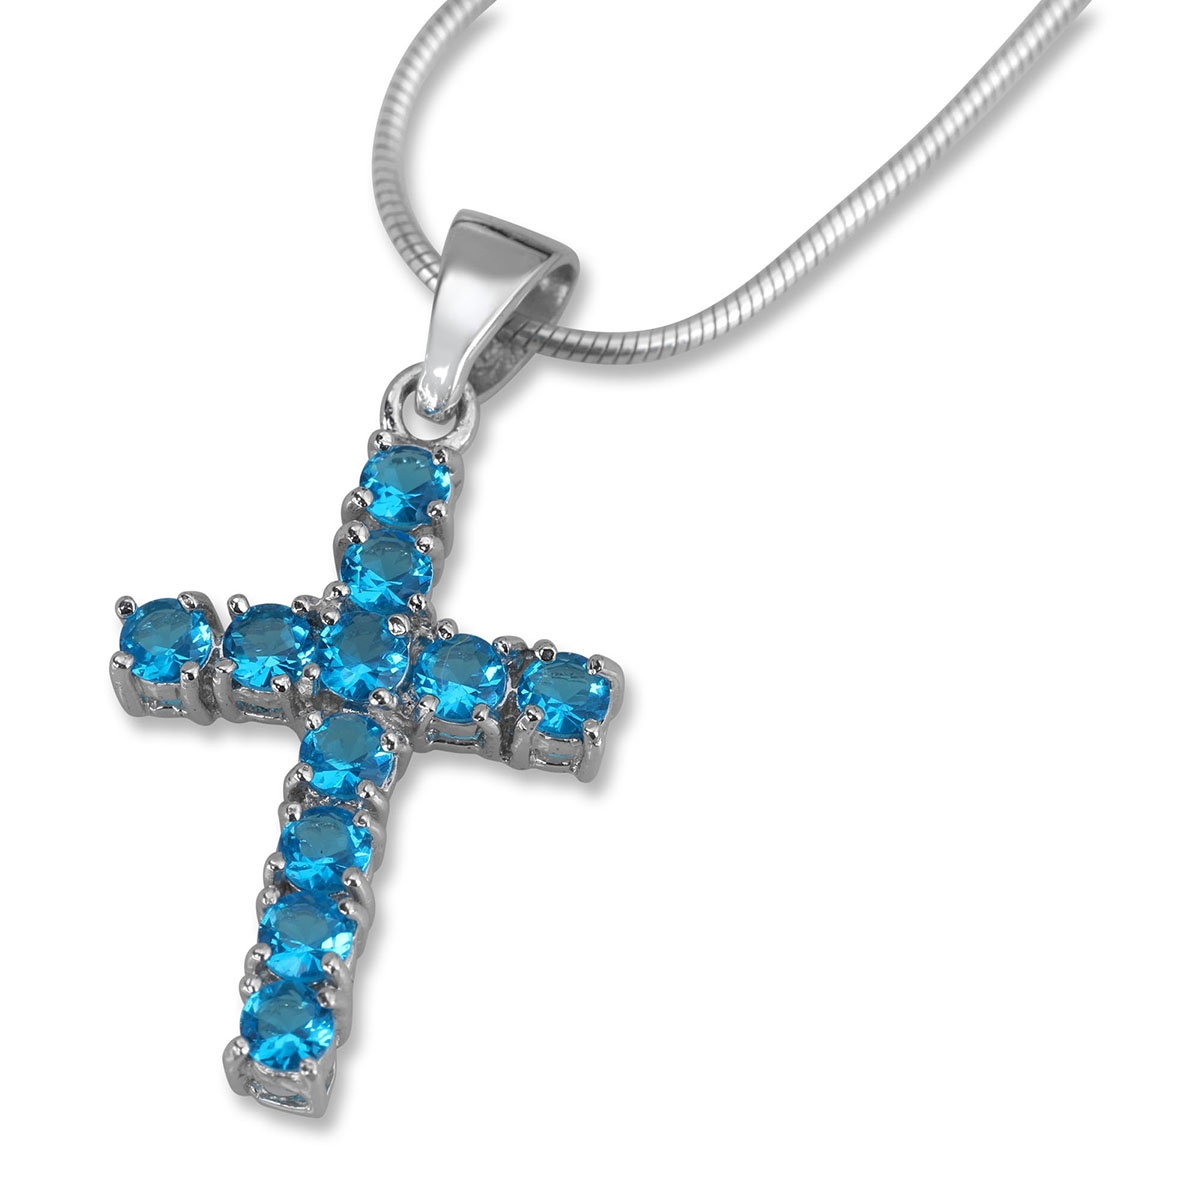 Rhodium Plated Sterling Silver Cross with Blue Cubic Zirconia - 1